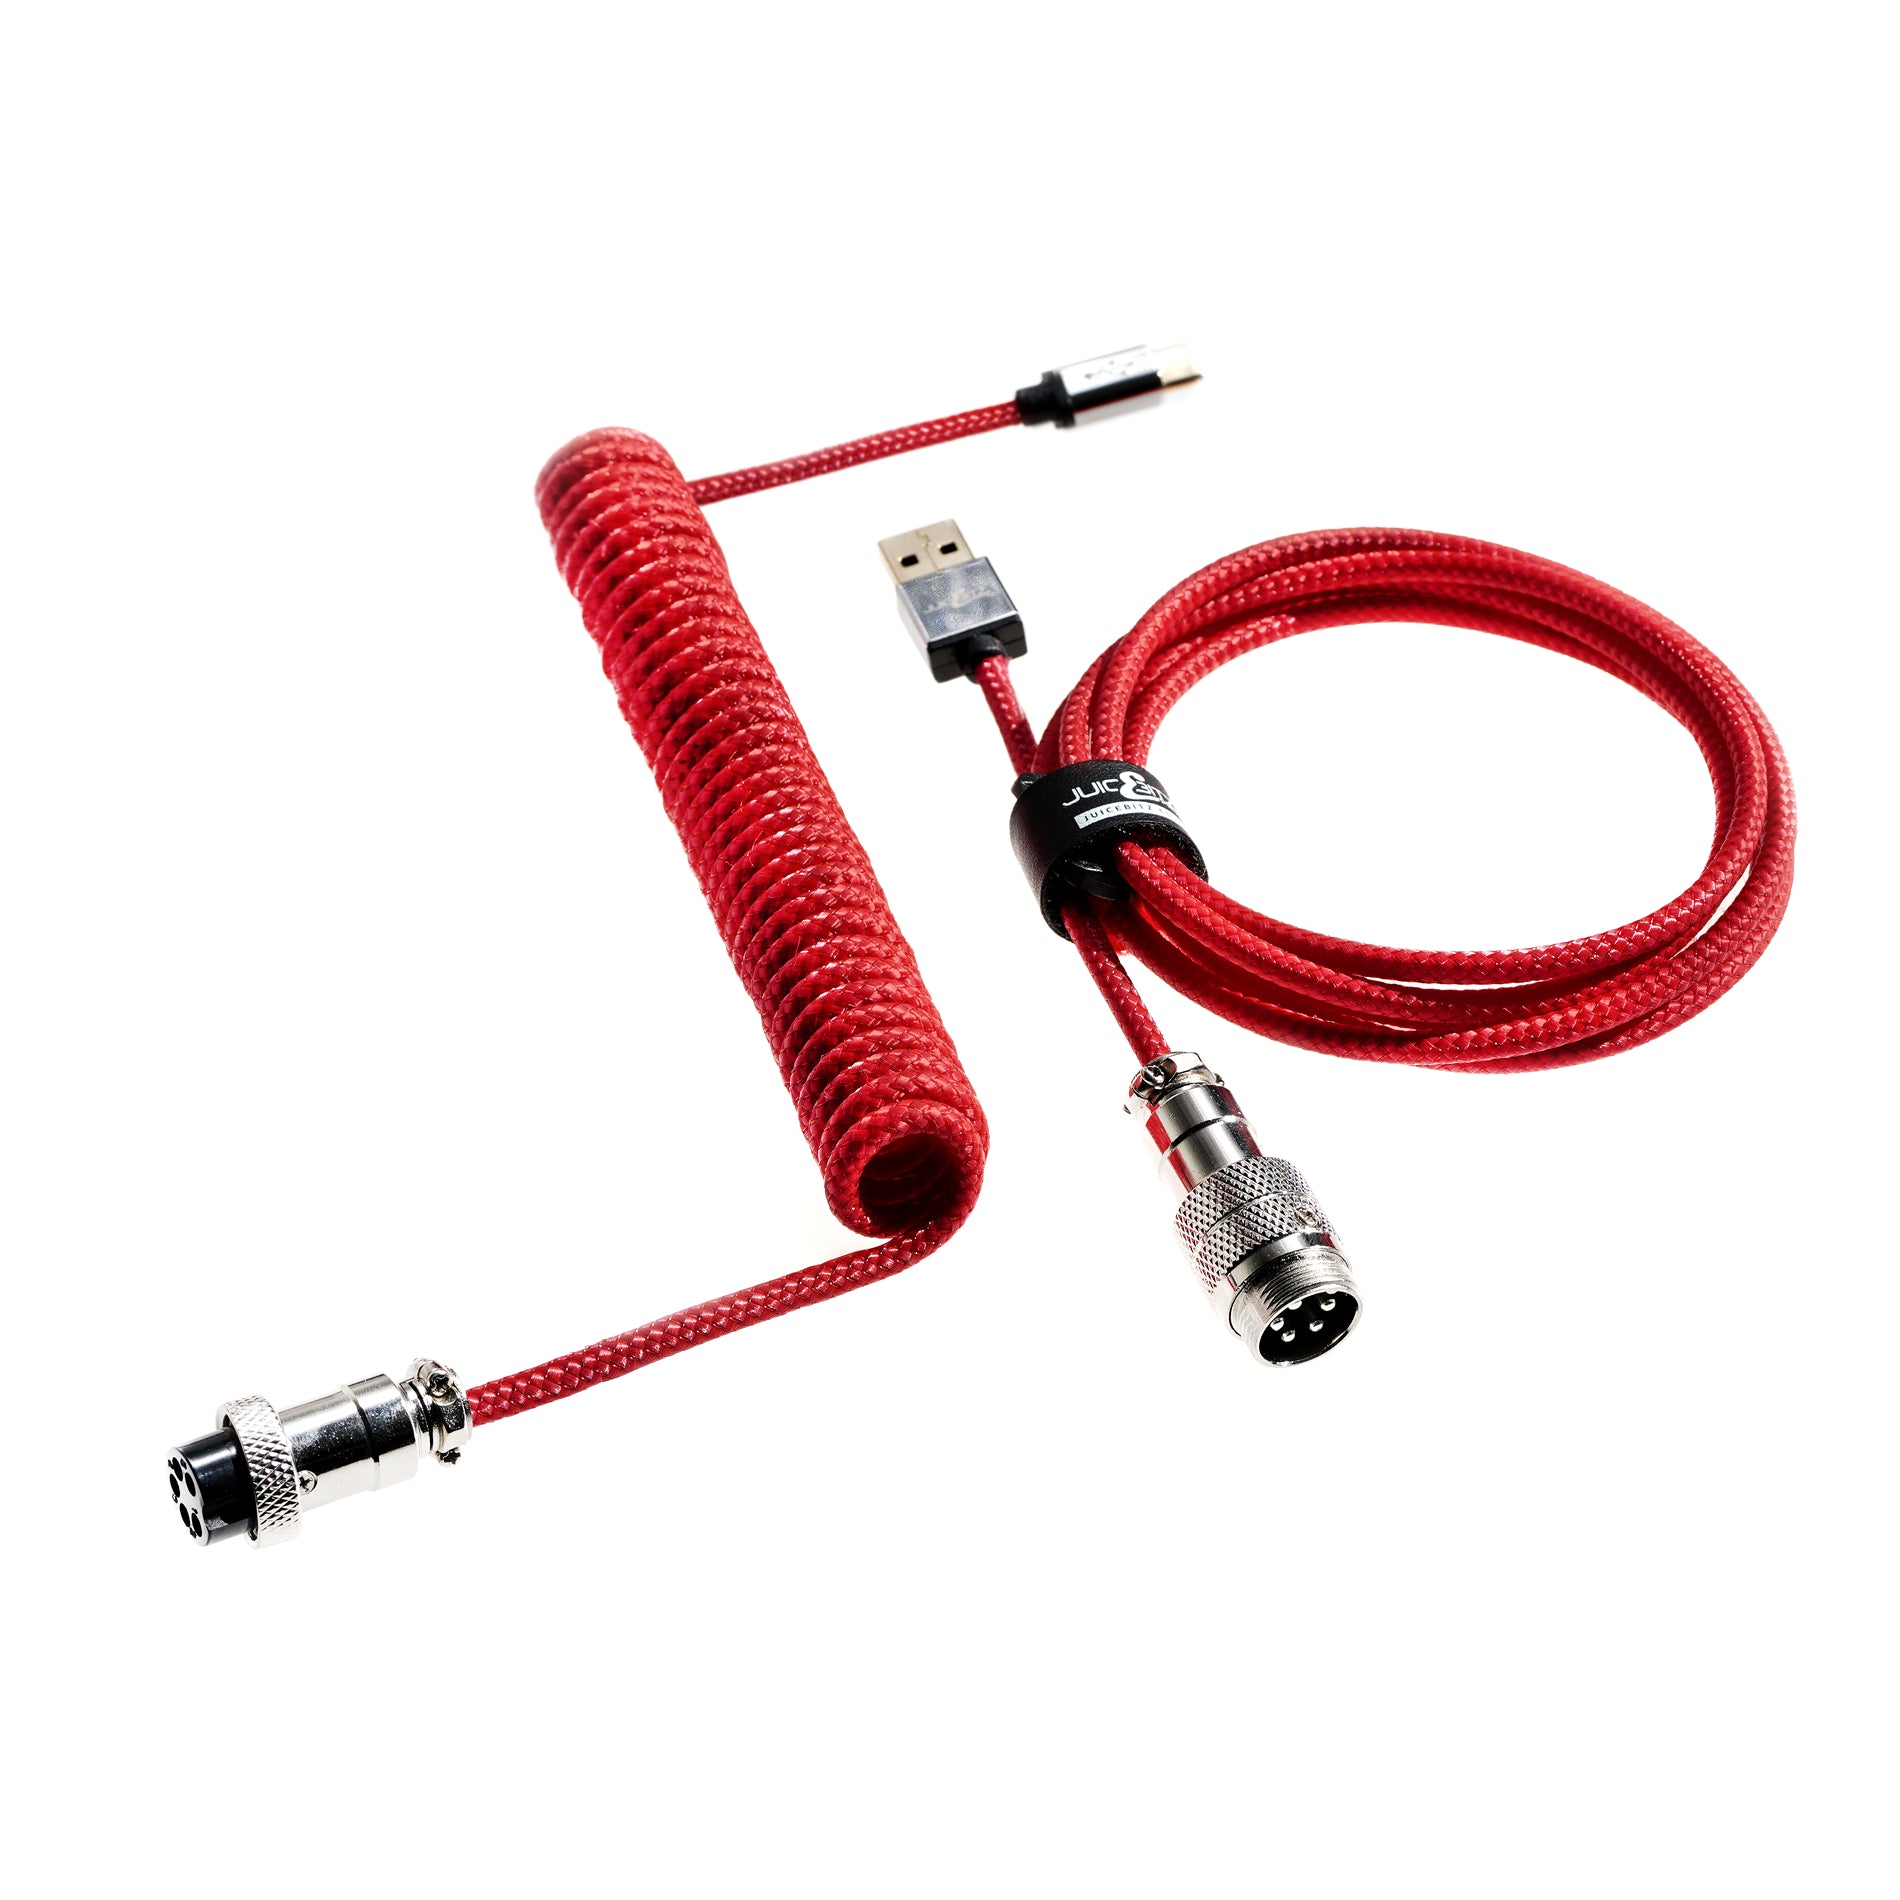 PRO Series Retractable Coiled USB 2.0 to GX16 + GX16 to USB-C Cable for Mechanical Keyboard - Red